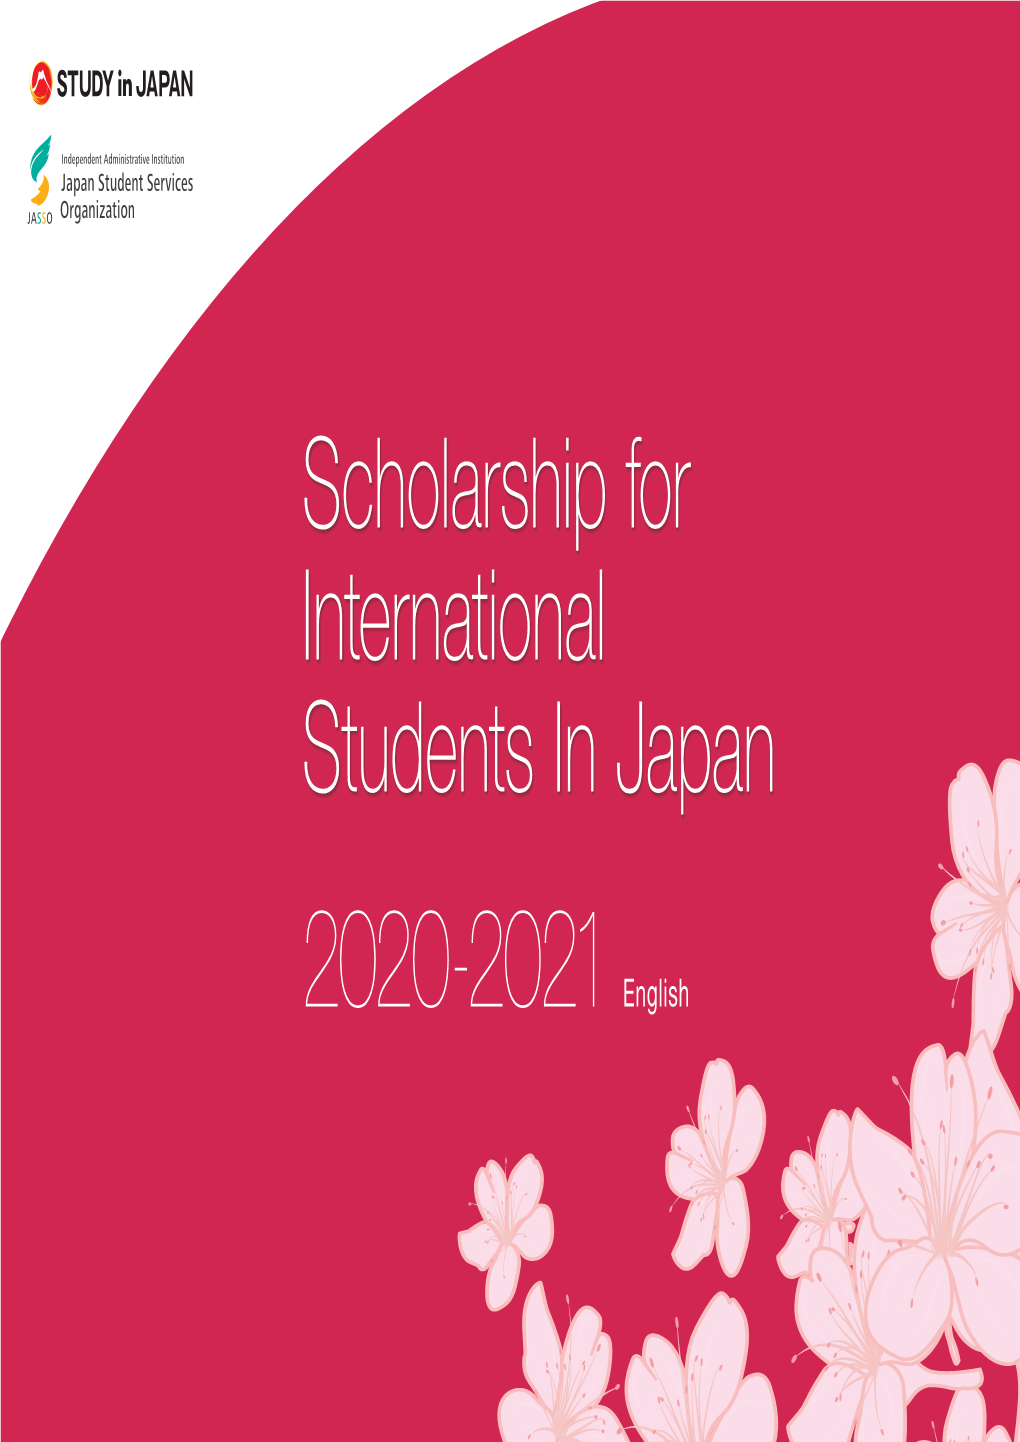 Scholarships to Study in Japan for the Applicants Residing Abroad ・・・・・・31 1 Certain Country Or Region with Which the Enterprise Has Exchanges